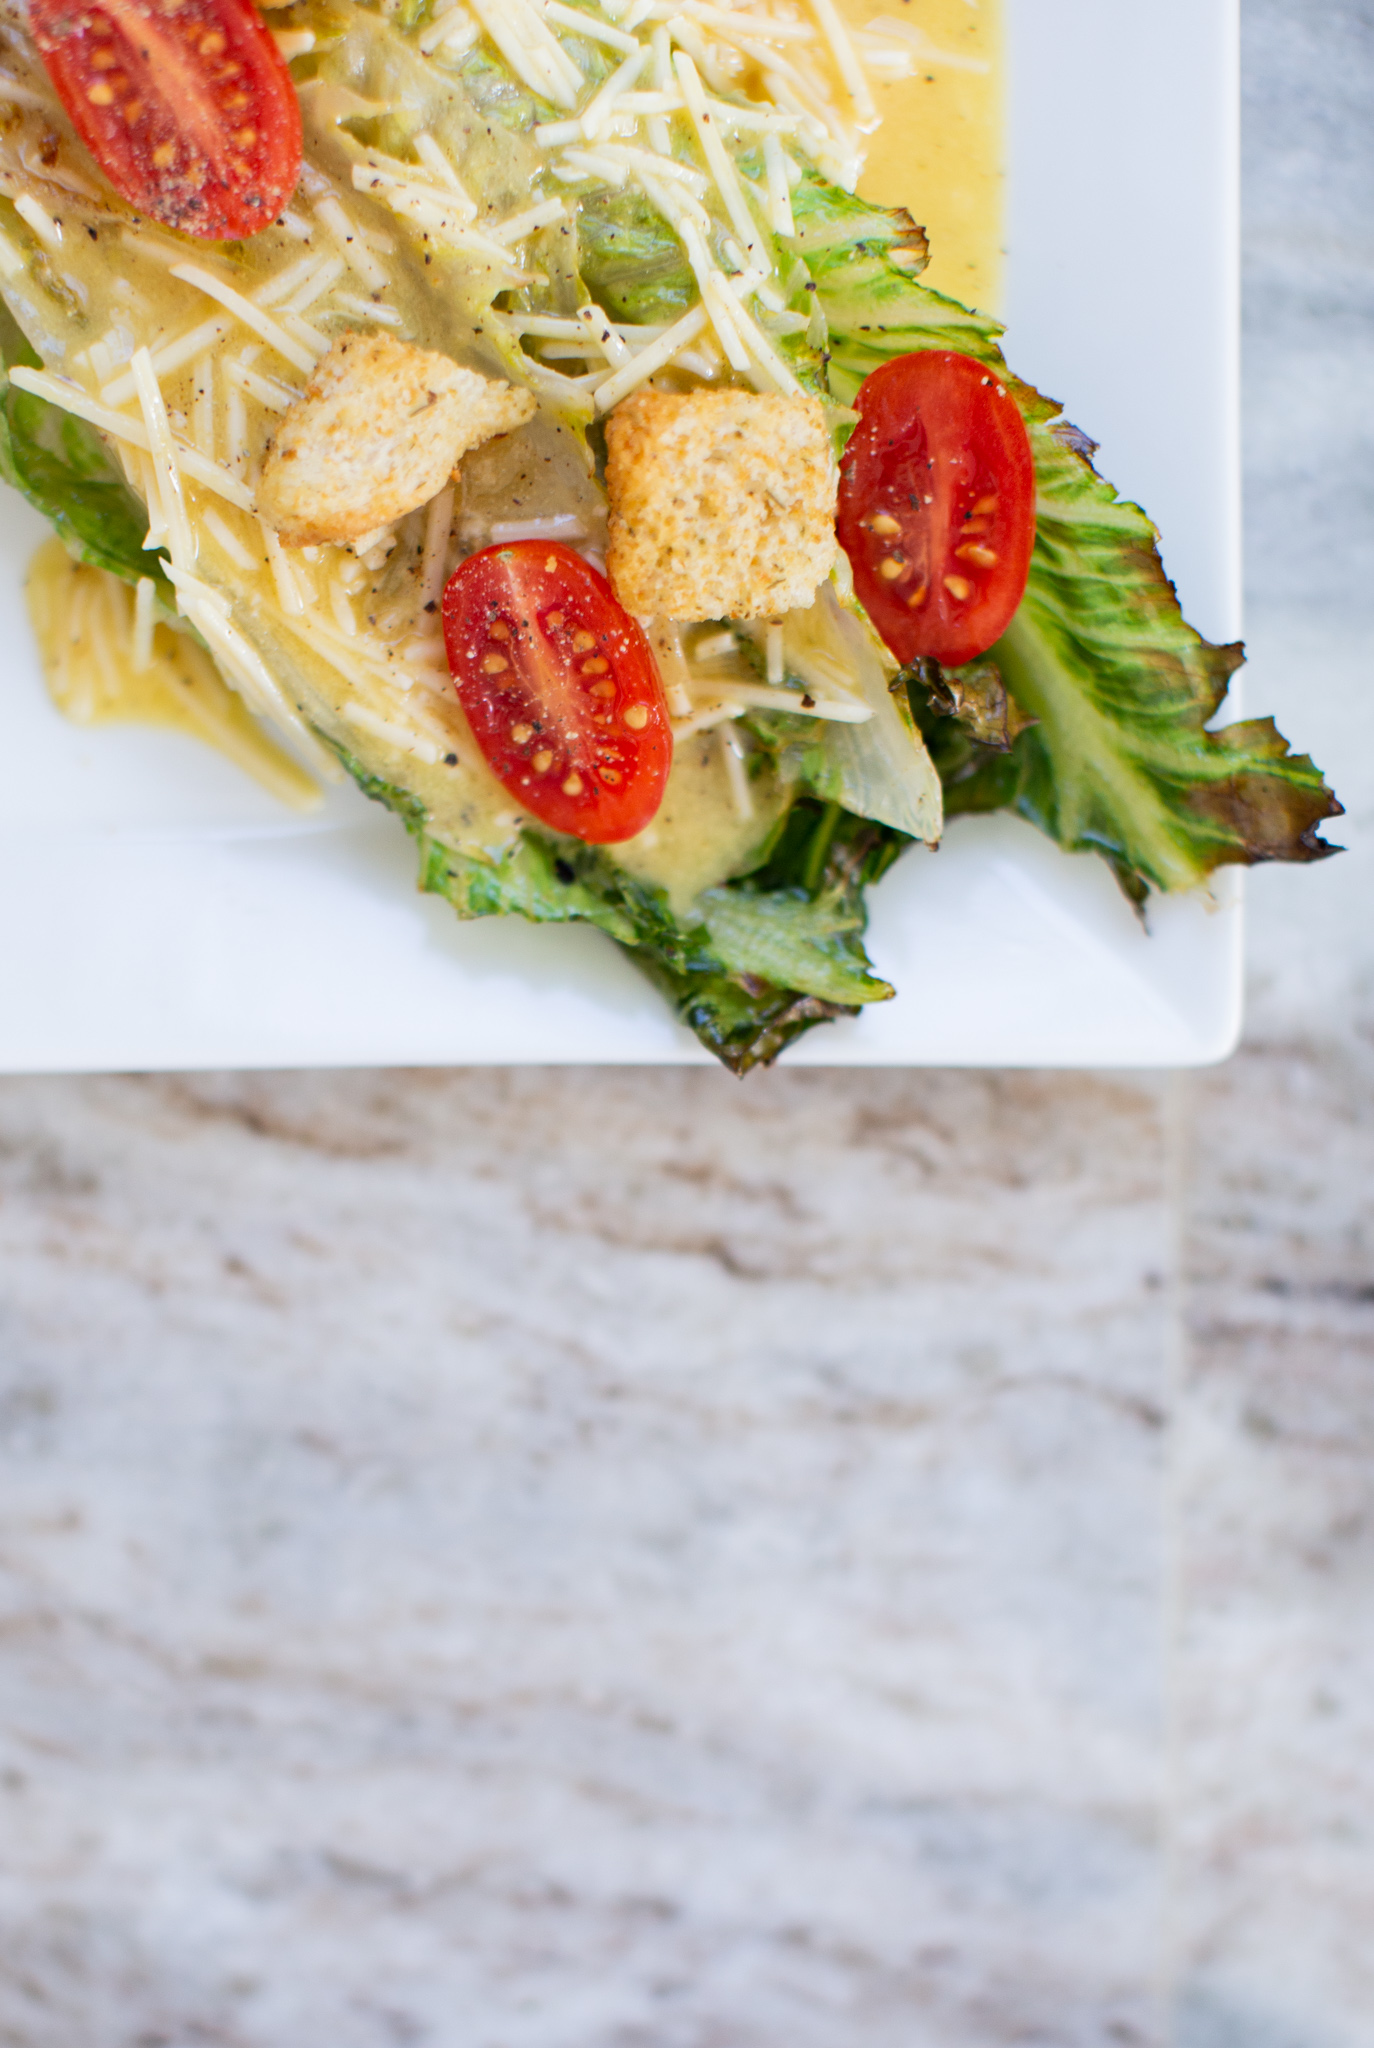 Grilled Romaine Salad by popular Ohio lifestyle blog, Coffee Beans and Bobby Pins: image of grilled romaine salad on square white ceramic plates with cherry tomatoes and grated parmesan cheese.  